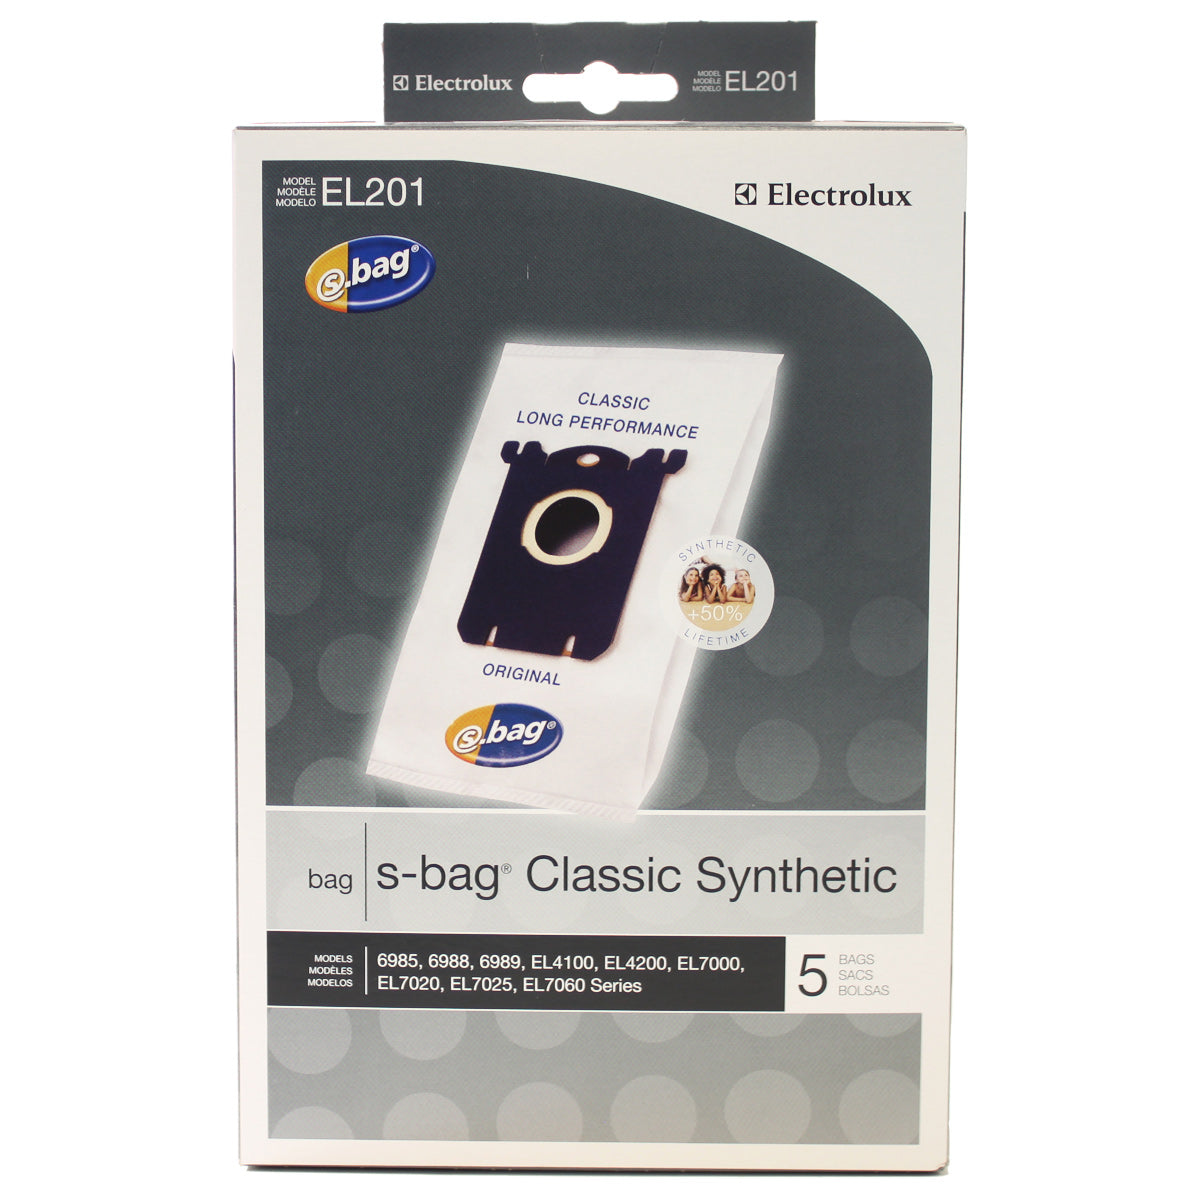 Electrolux S-bag Classic Synthetic bags 5pk Electrolux Vacuum Plus Canada